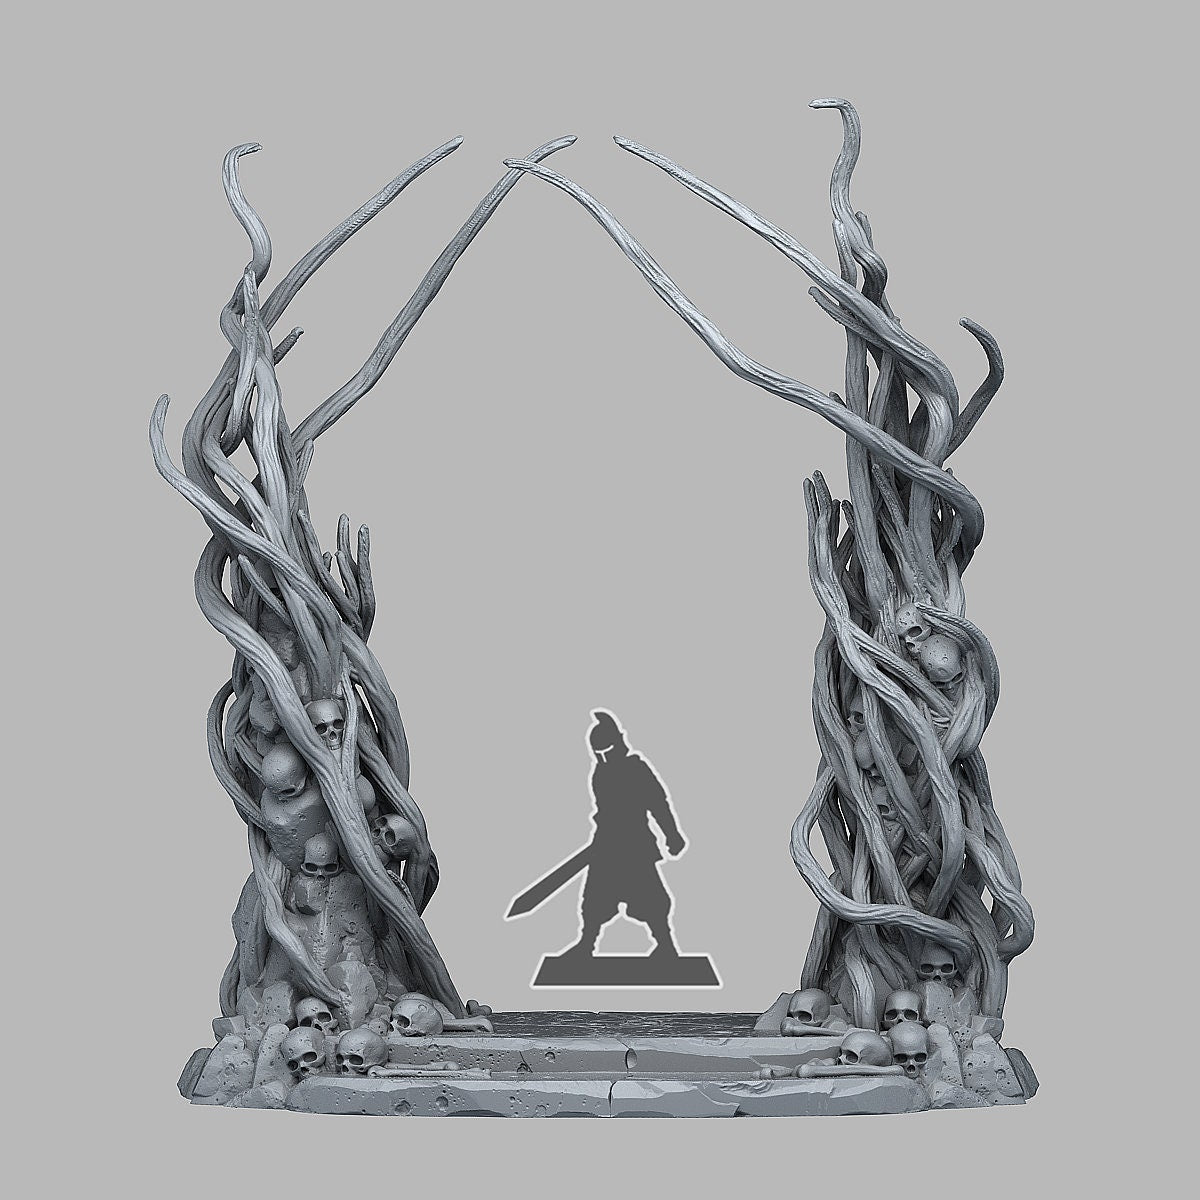 Dark Forest Portal | Scenery and terrain | 3D Printed Resin Miniature | Tabletop Role Playing | AoS | D&D | 40K | Pathfinder